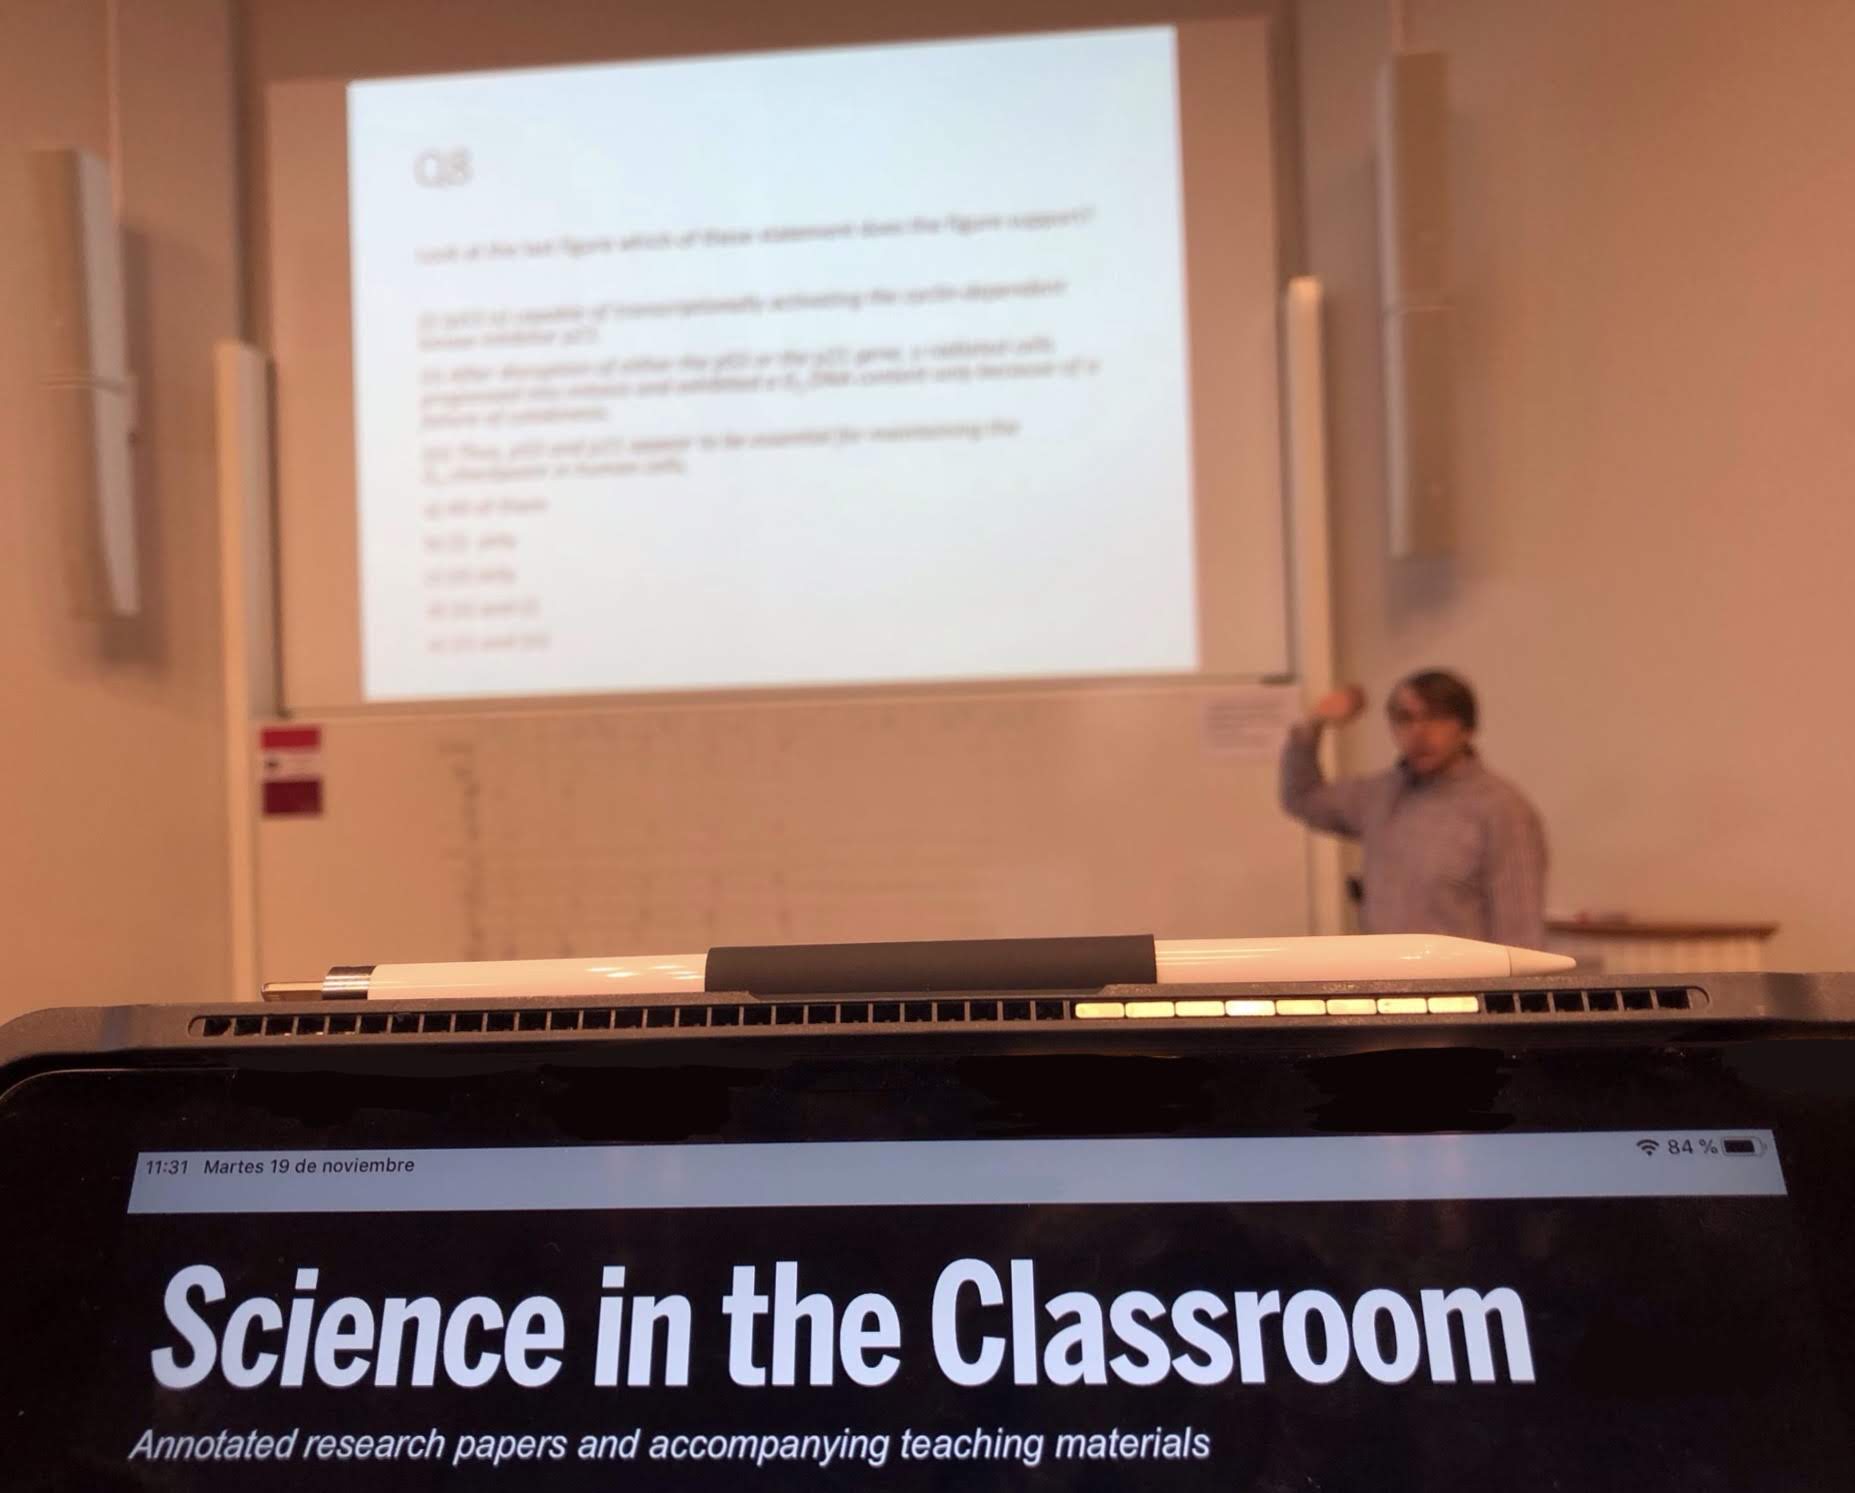 A teacher pointing to a projected screen in the background, with a device screen showing "Science in the Classroom" in the foreground. The subheading is "Annotated research papers and accompanying teaching materials